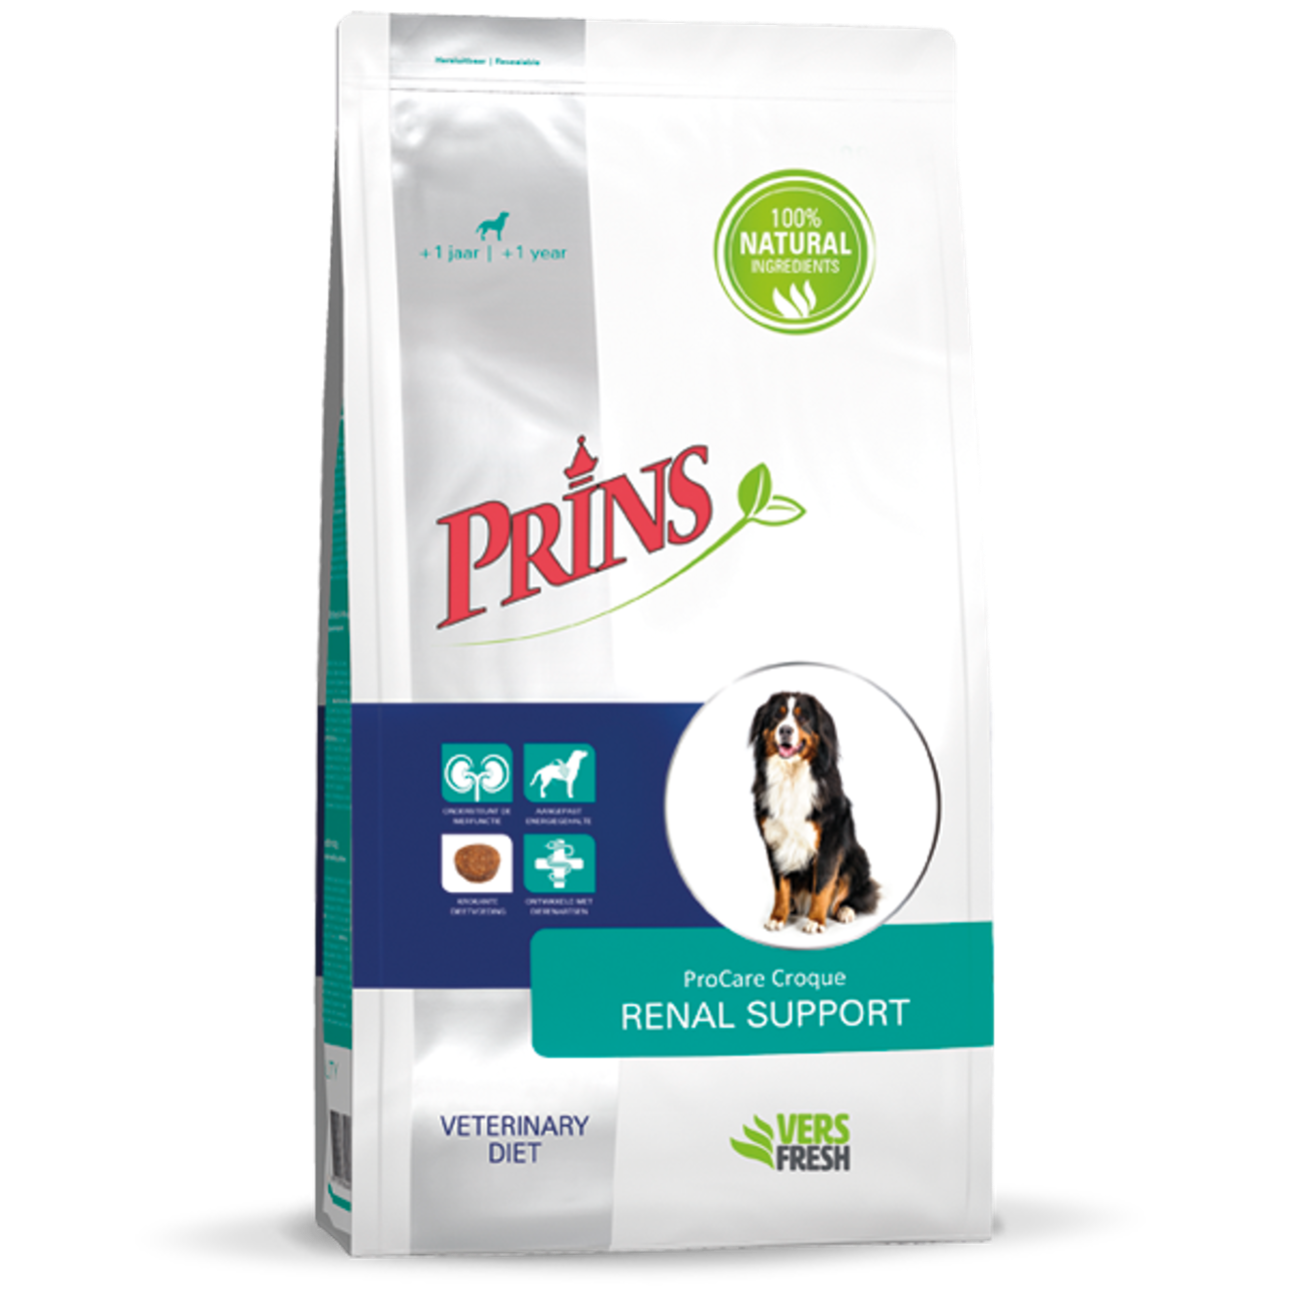 Prins ProCare Croque Diet RENAL SUPPORT Dry Dog Food With Poultry, 3kg